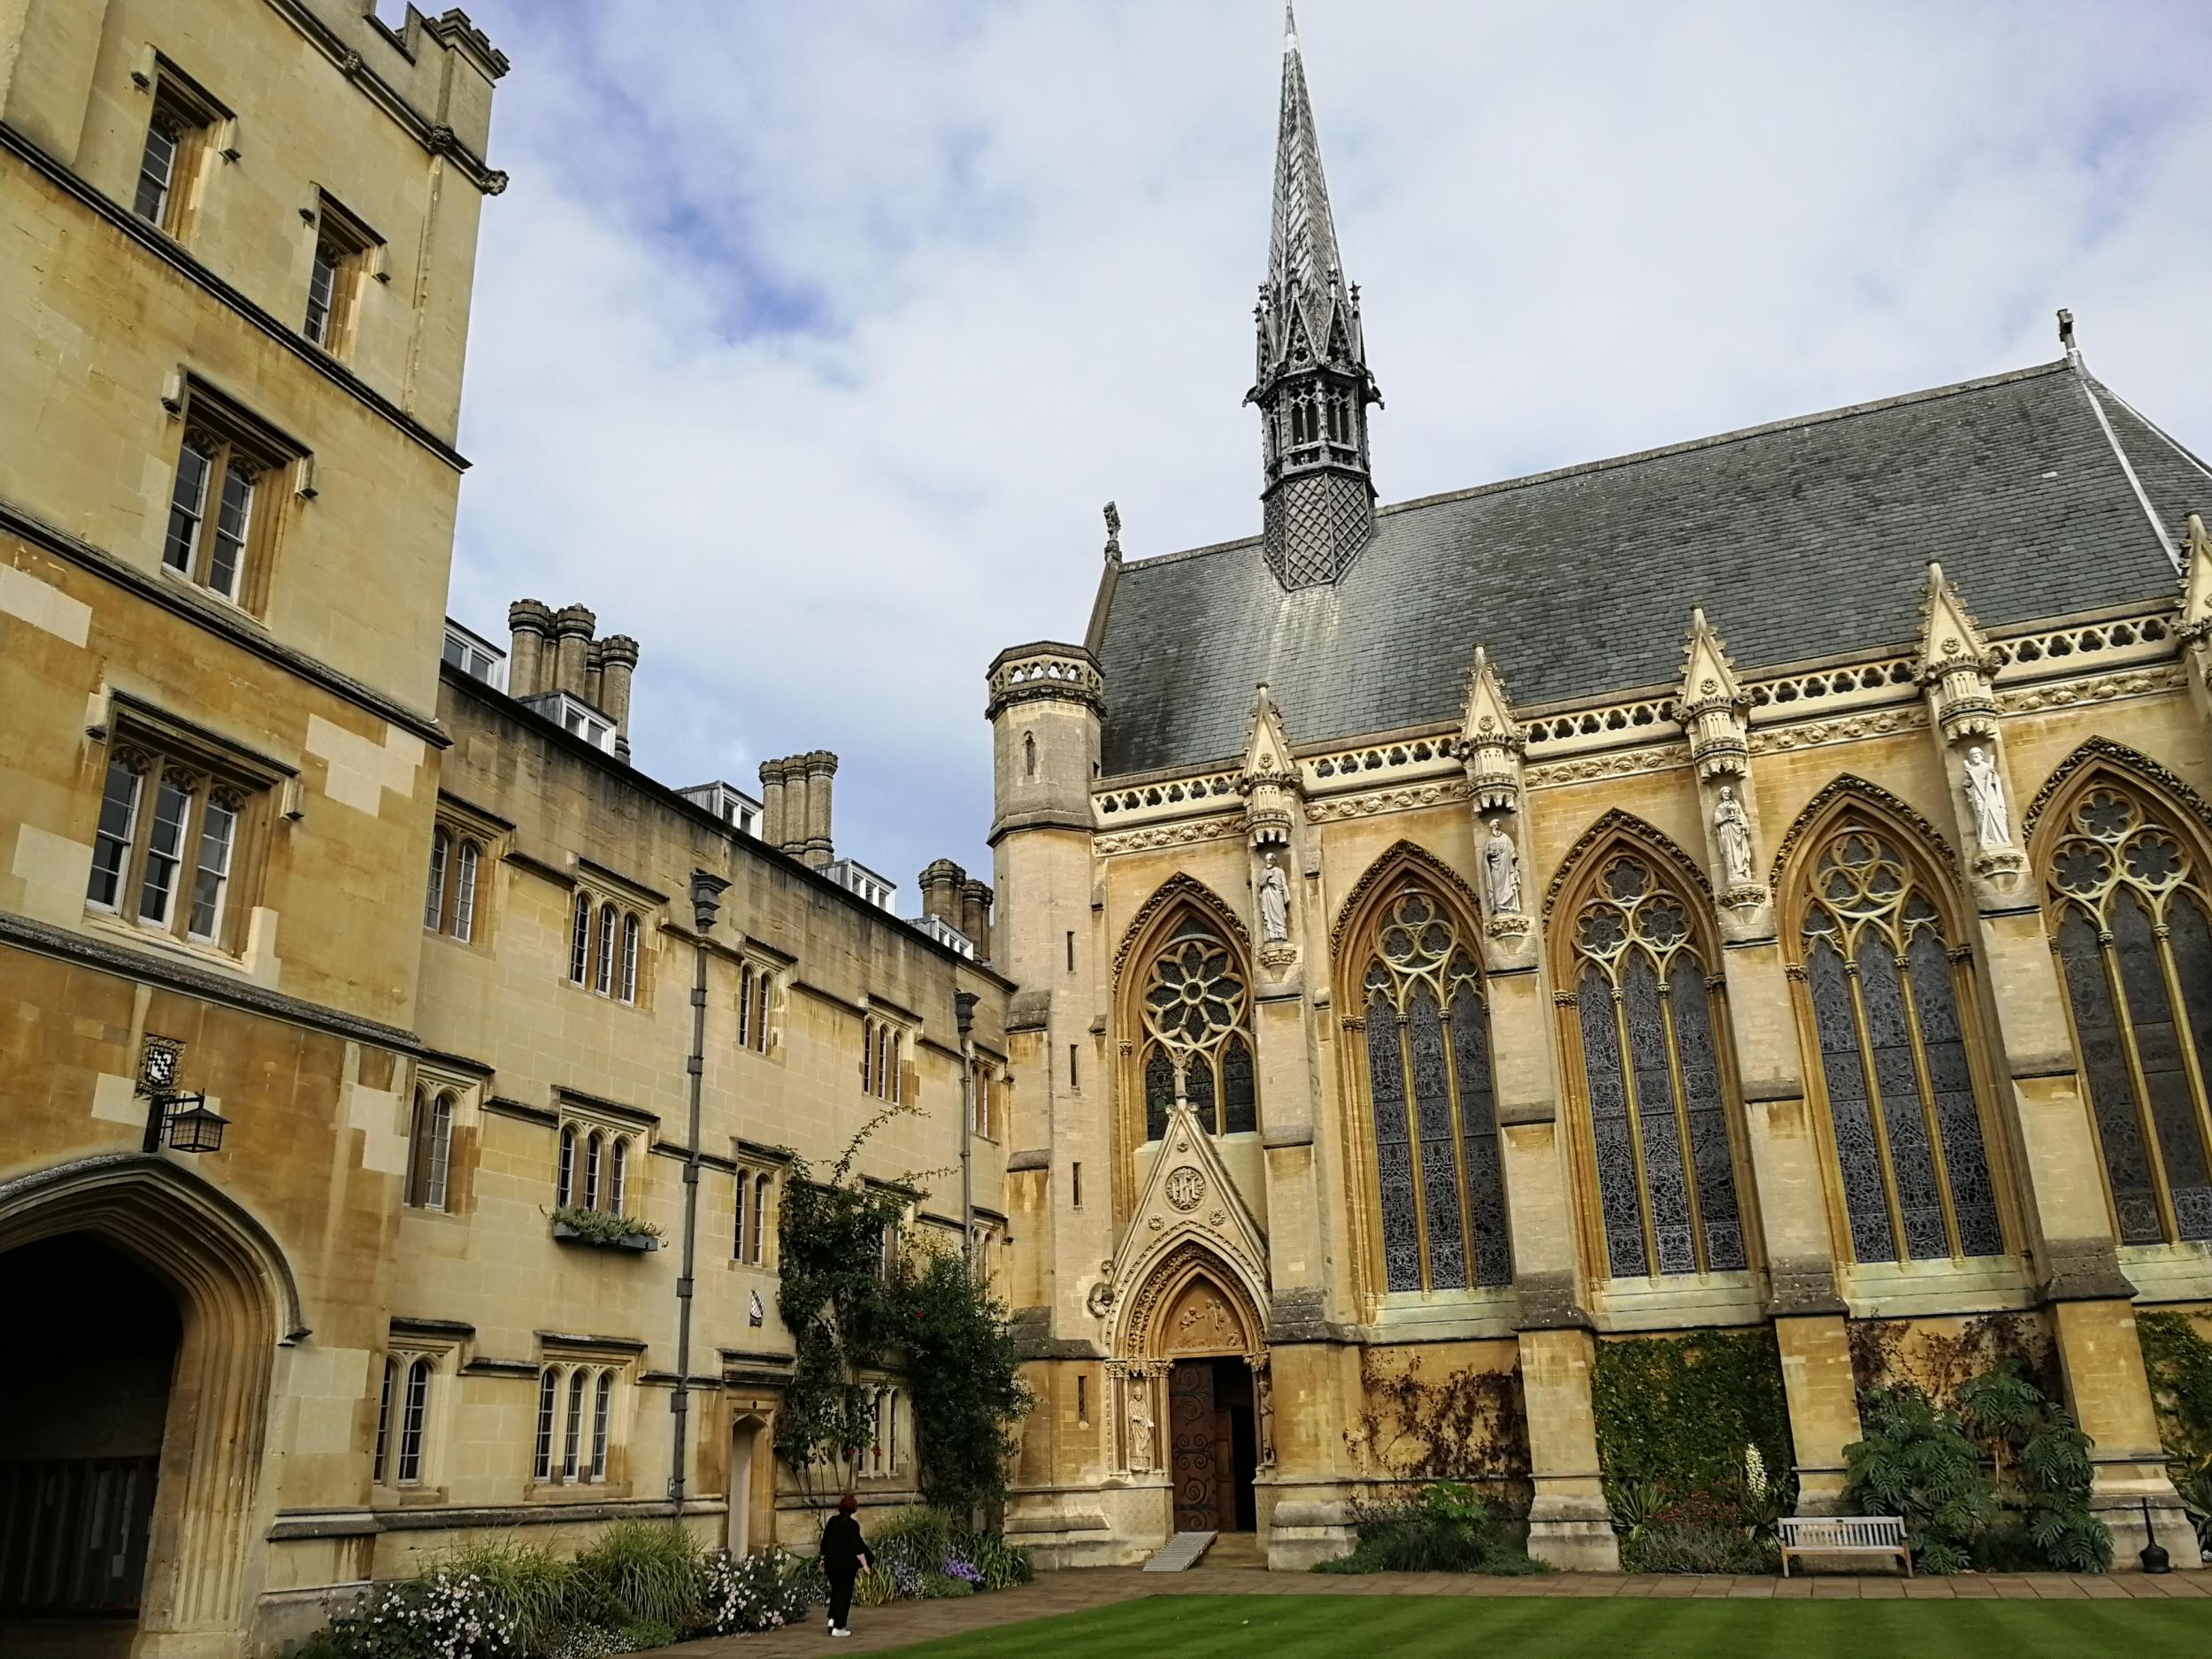 Exeter College, which inspired the protagonist’s Jordan College